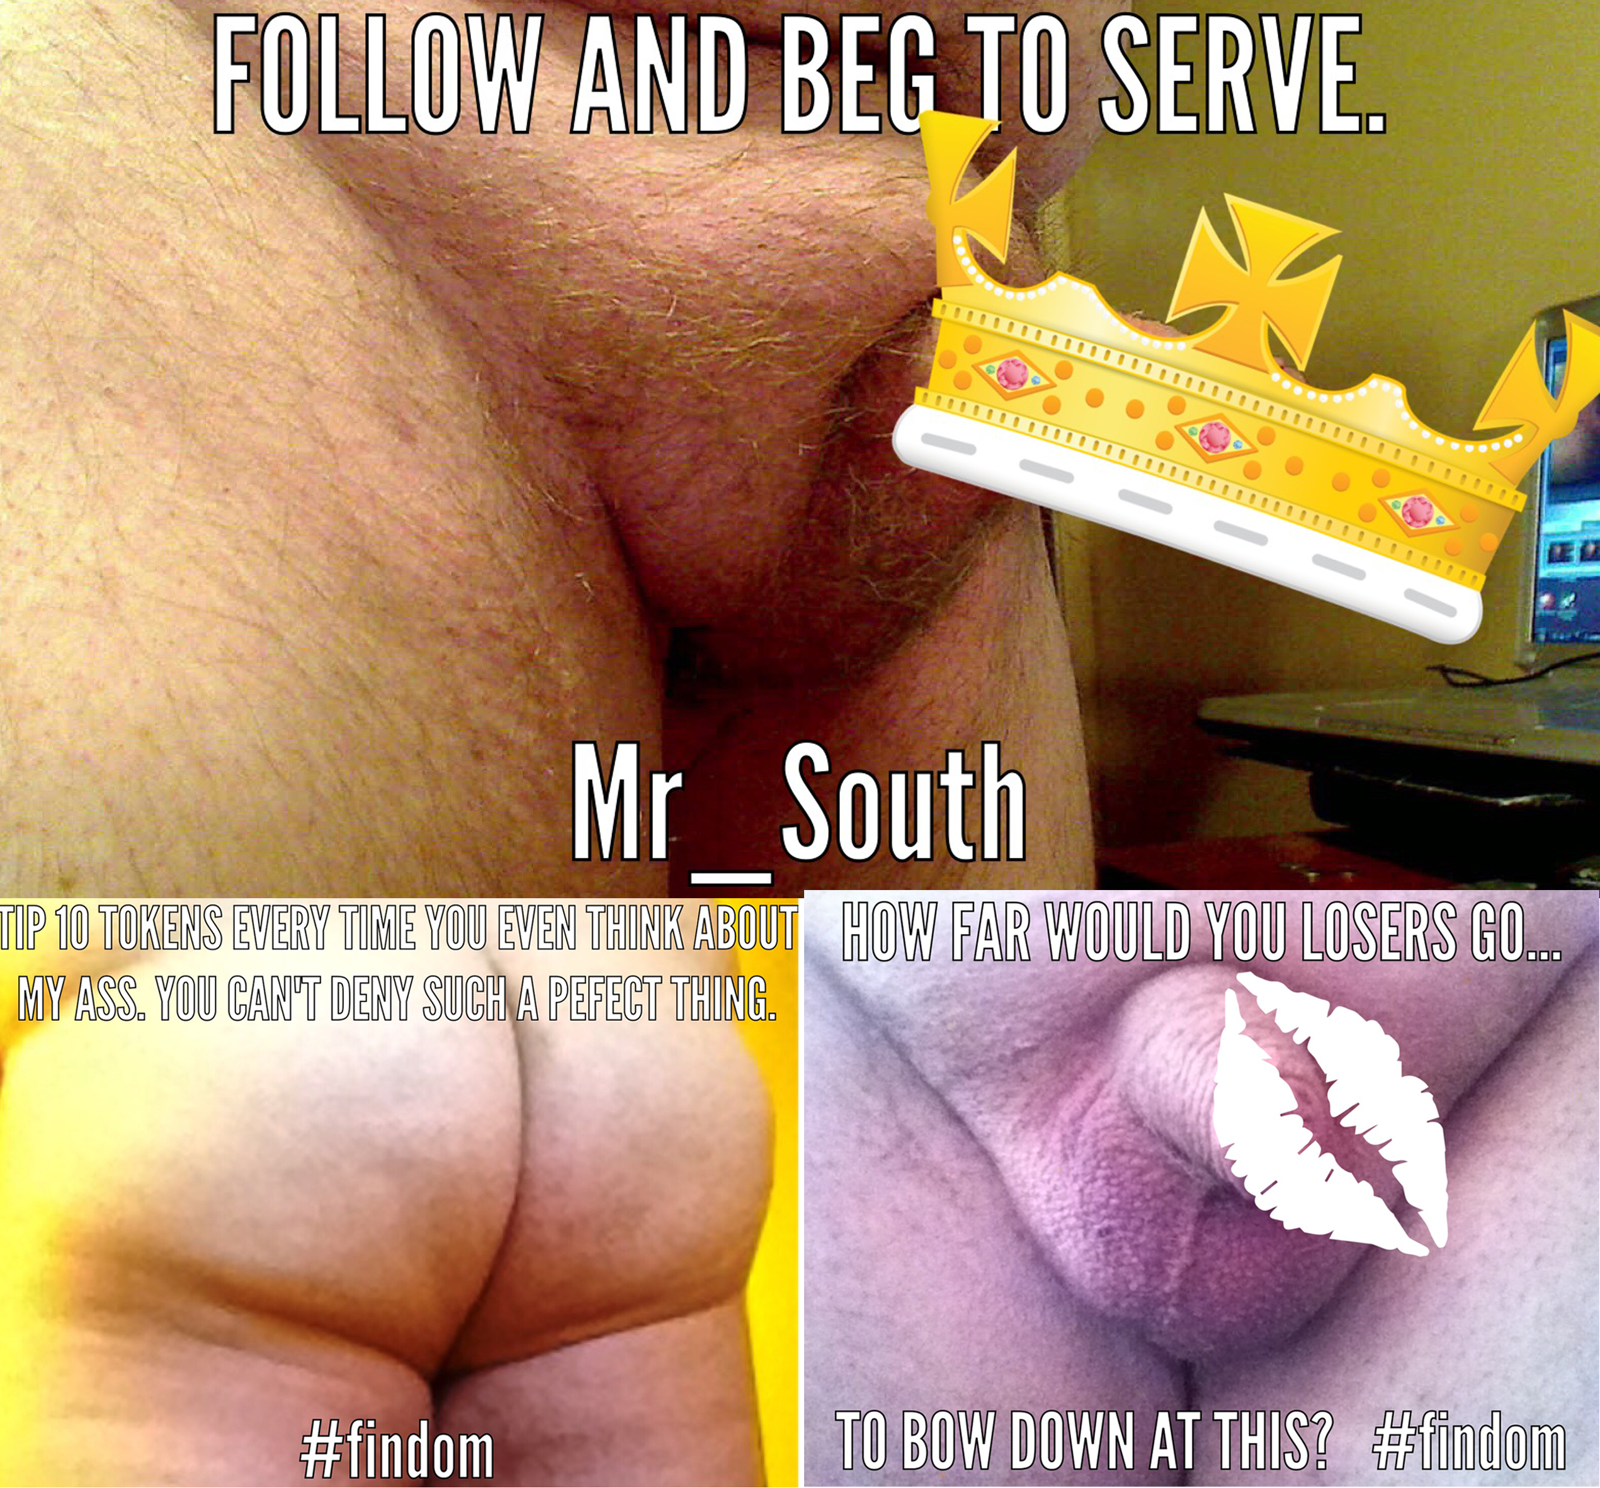 Photo by MrAlSouth with the username @MrAlSouth, who is a star user,  December 7, 2019 at 12:13 AM and the text says 'Findom Friday. Leave your tributes here. 
www.onlyfans.com/mr_south
www.MrAlSouth.manyvids.com
#FindomFriday #Webcams #OnlyFans #ManyVids'